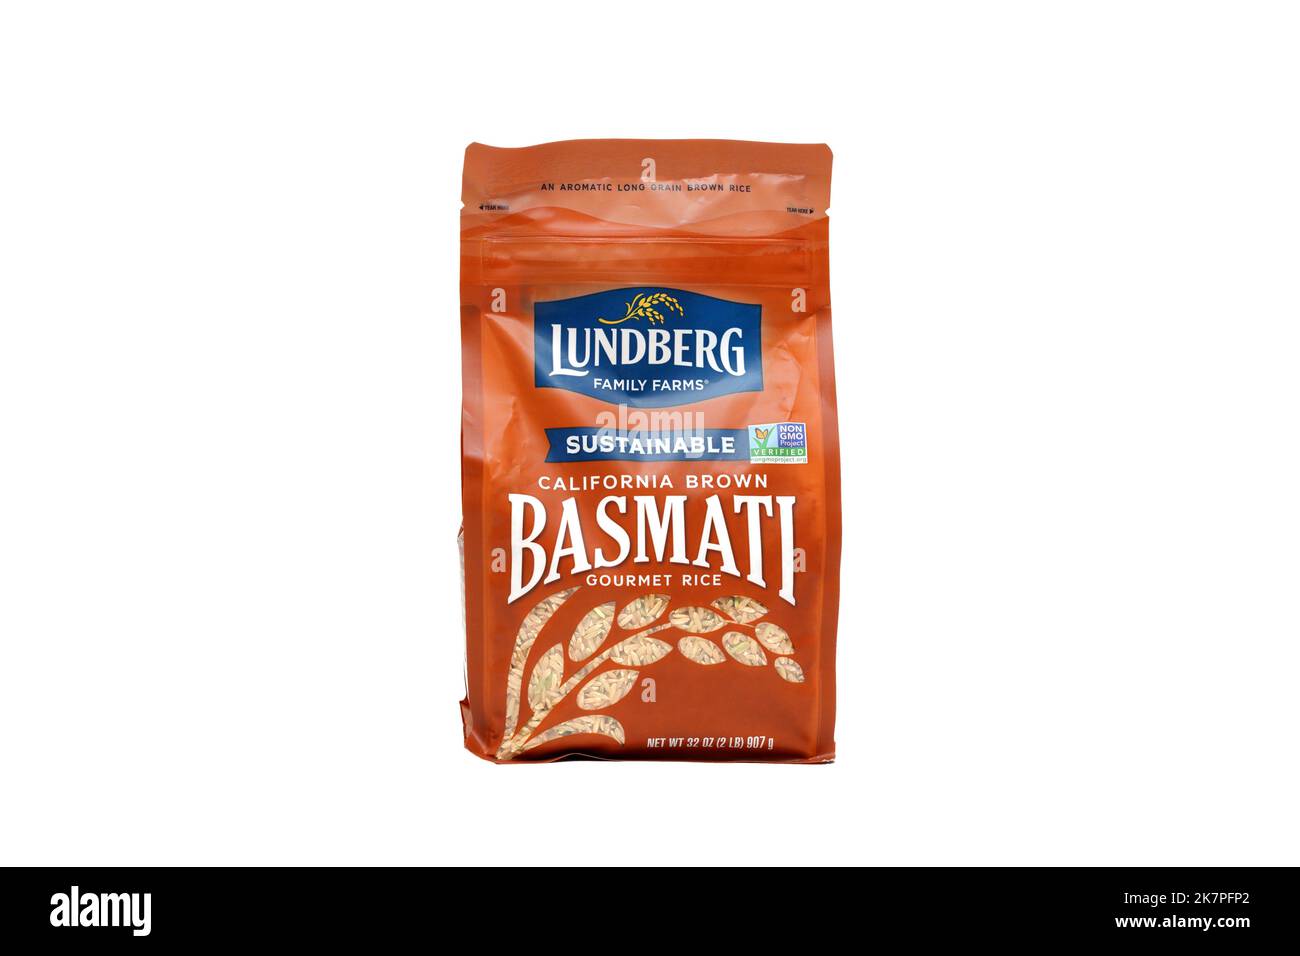 A bag of Lundberg Family Farms California Brown Basmati Rice isolated on a white background. cutout image for illustration and editorial use. Stock Photo